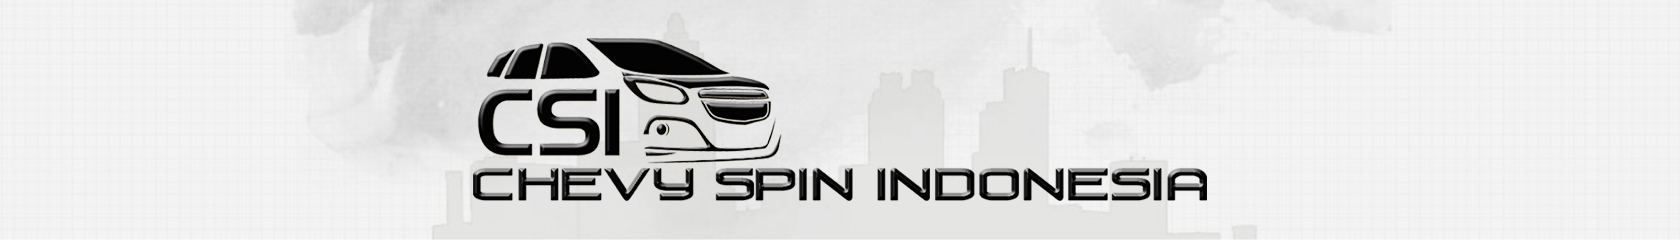 Chevy Spin Indonesia